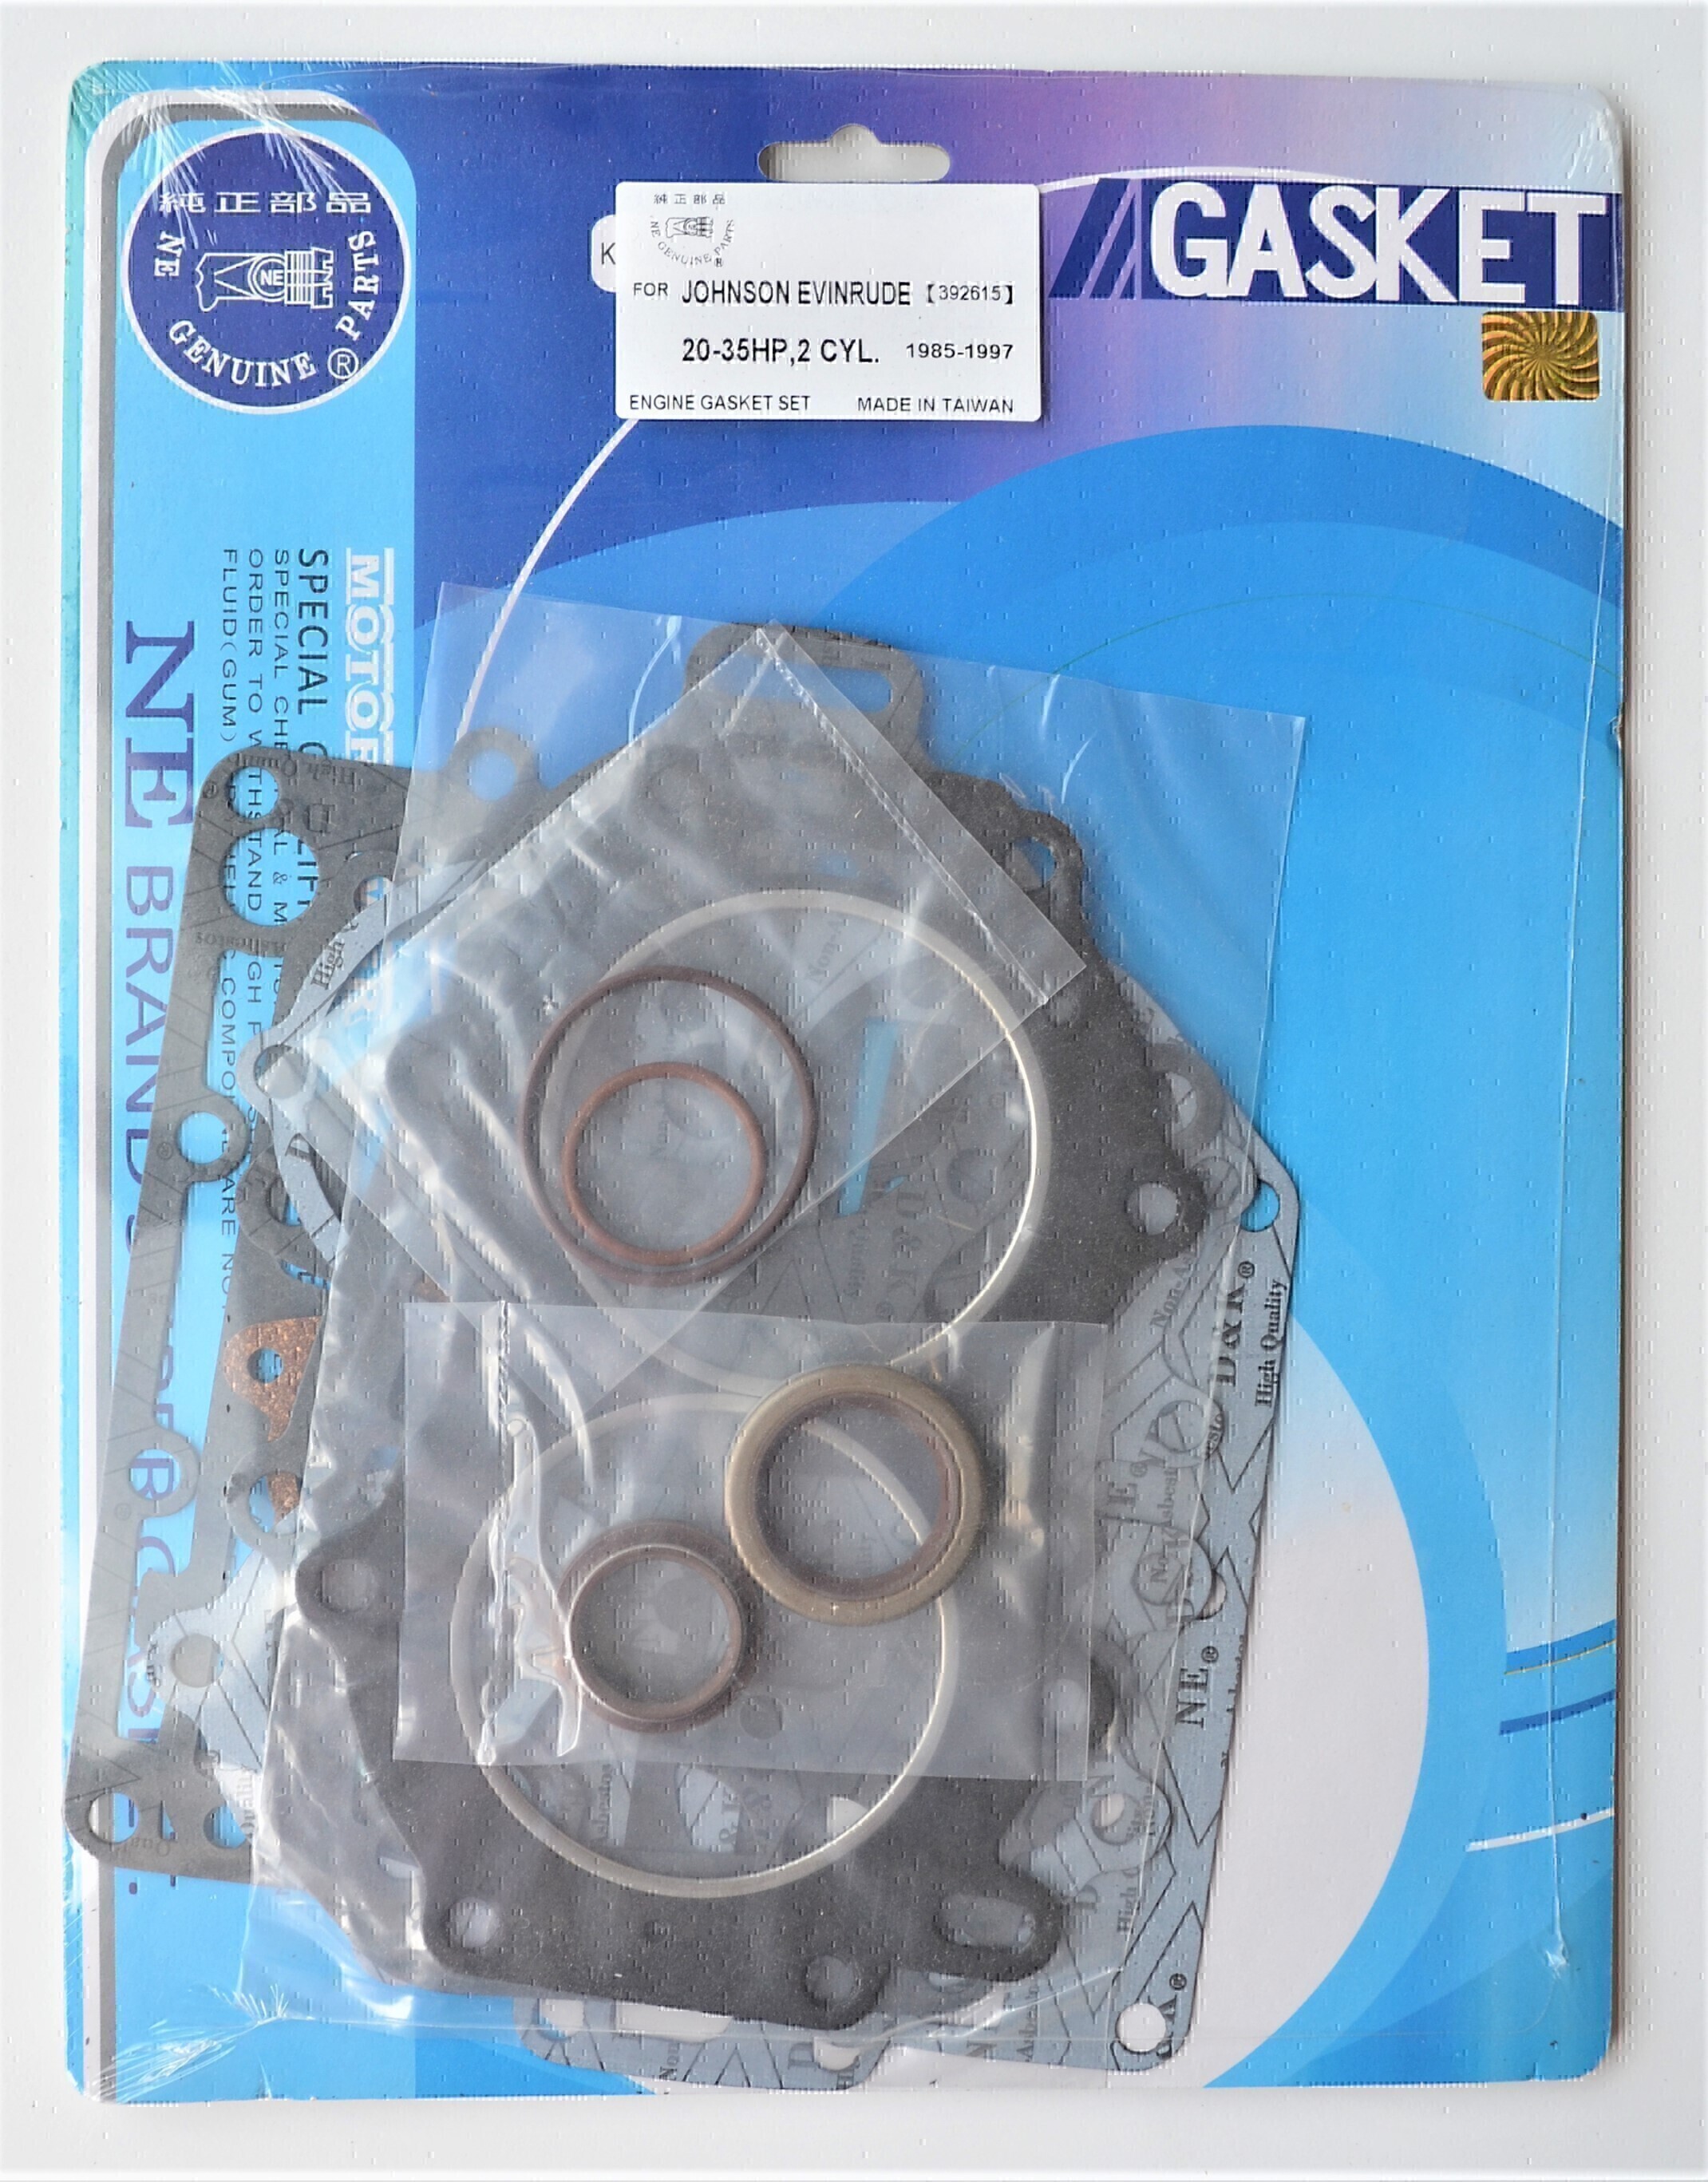 COMPLETE GASKET KIT FOR EVINRUDE JOHNSON 20HP 25HP 30HP 35 HP 2 CYL 1985/1997 OUTBOARD MOTOR # 392615